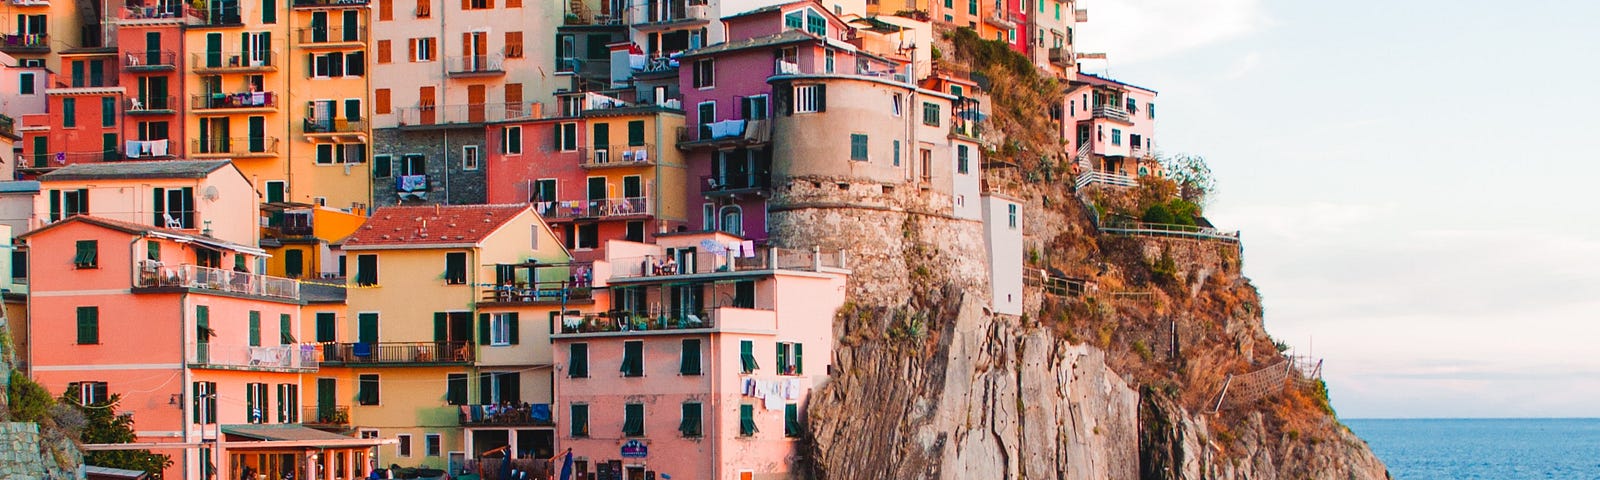 Colorful houses built on a town on top of a hill.